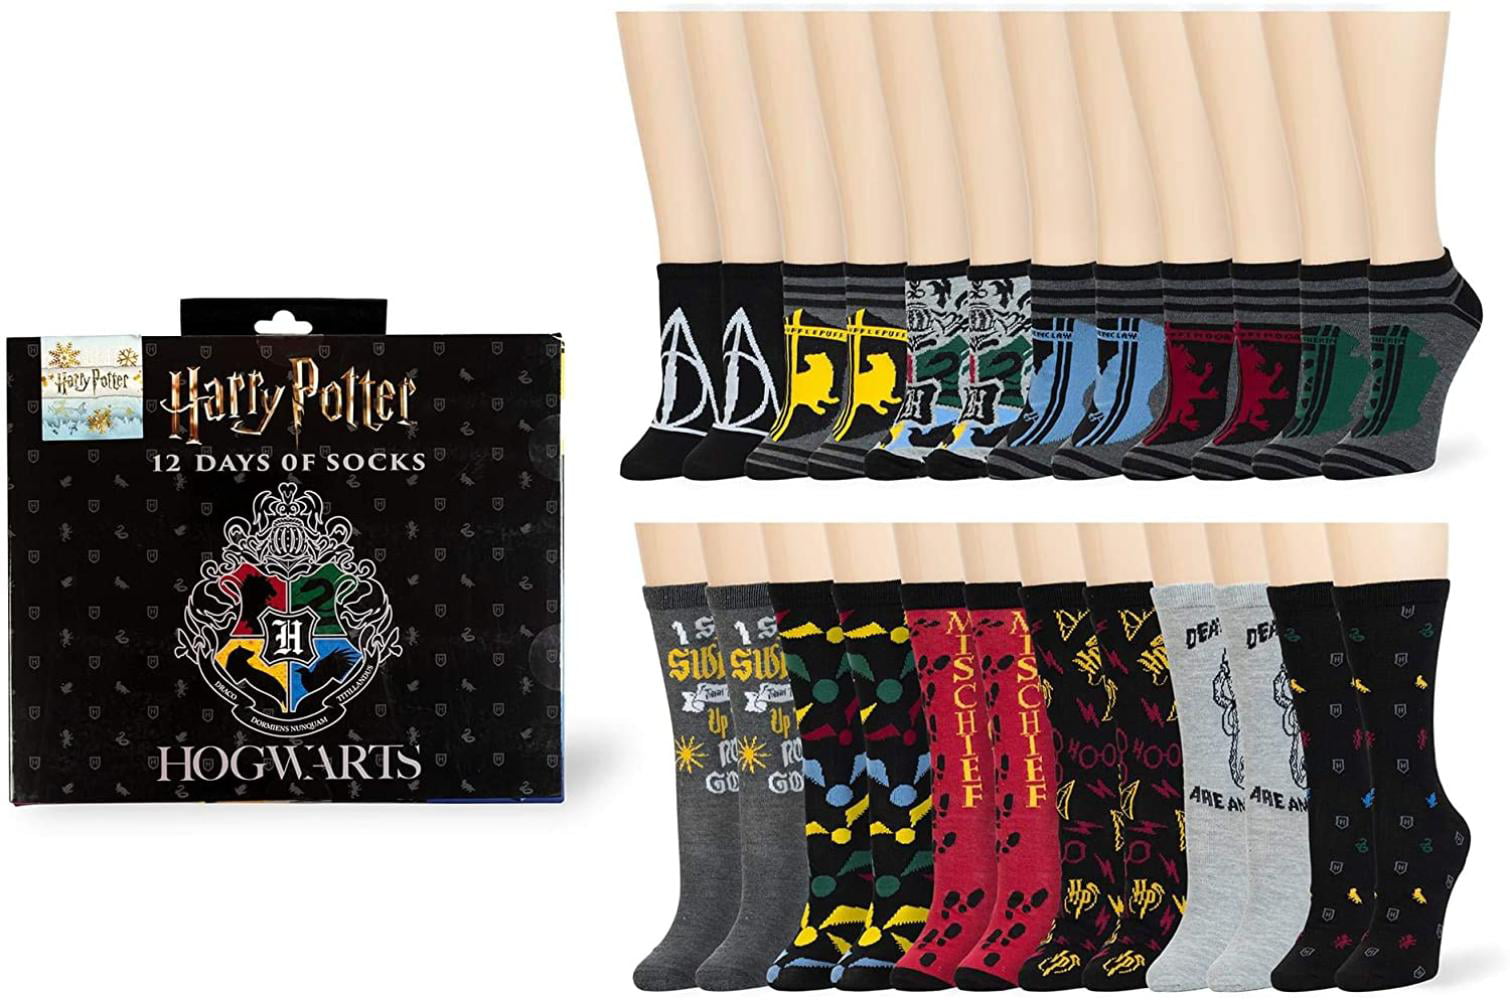 Harry Potter Women's Socks Chunky Knitted Cosy Winter Ladies Blue Primark Thick 